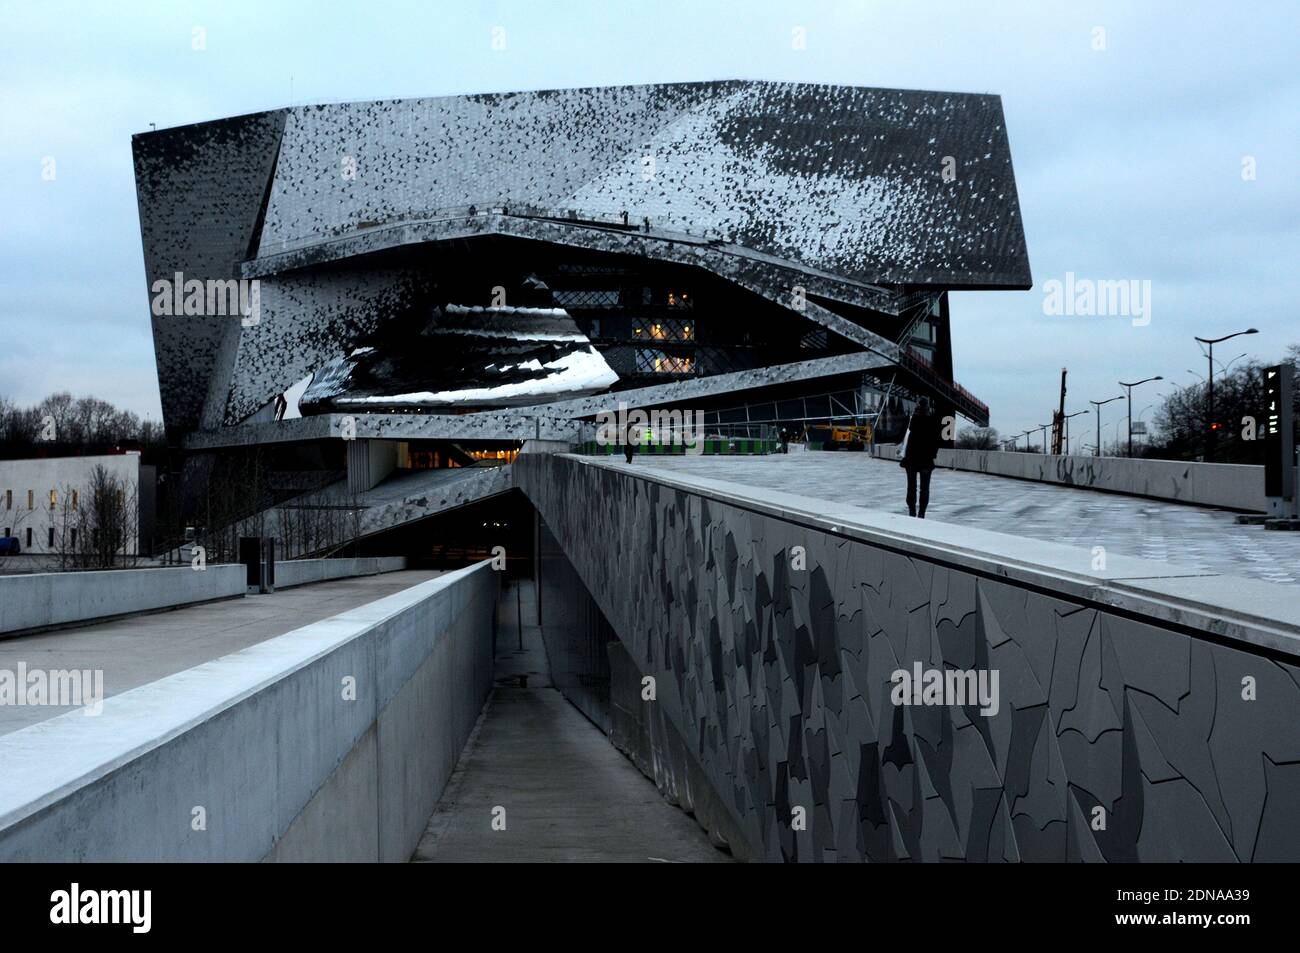 The new 'Philharmonie de Paris' in the Parc de la Villette, near Porte de Pantin in northeastern Paris, France on January 19, 2015. The Philharmonie, a multi-level concert complex designed by French architect Jean Nouvel whose main hall seats 2,400 on sweeping balconies surrounding the centre stage, took eight years and 386 million euros (455 million Dollars) of public money to build -- a budget three times its initial estimate. Photo by Alain Apaydin/ABACAPRESS.COM Stock Photo